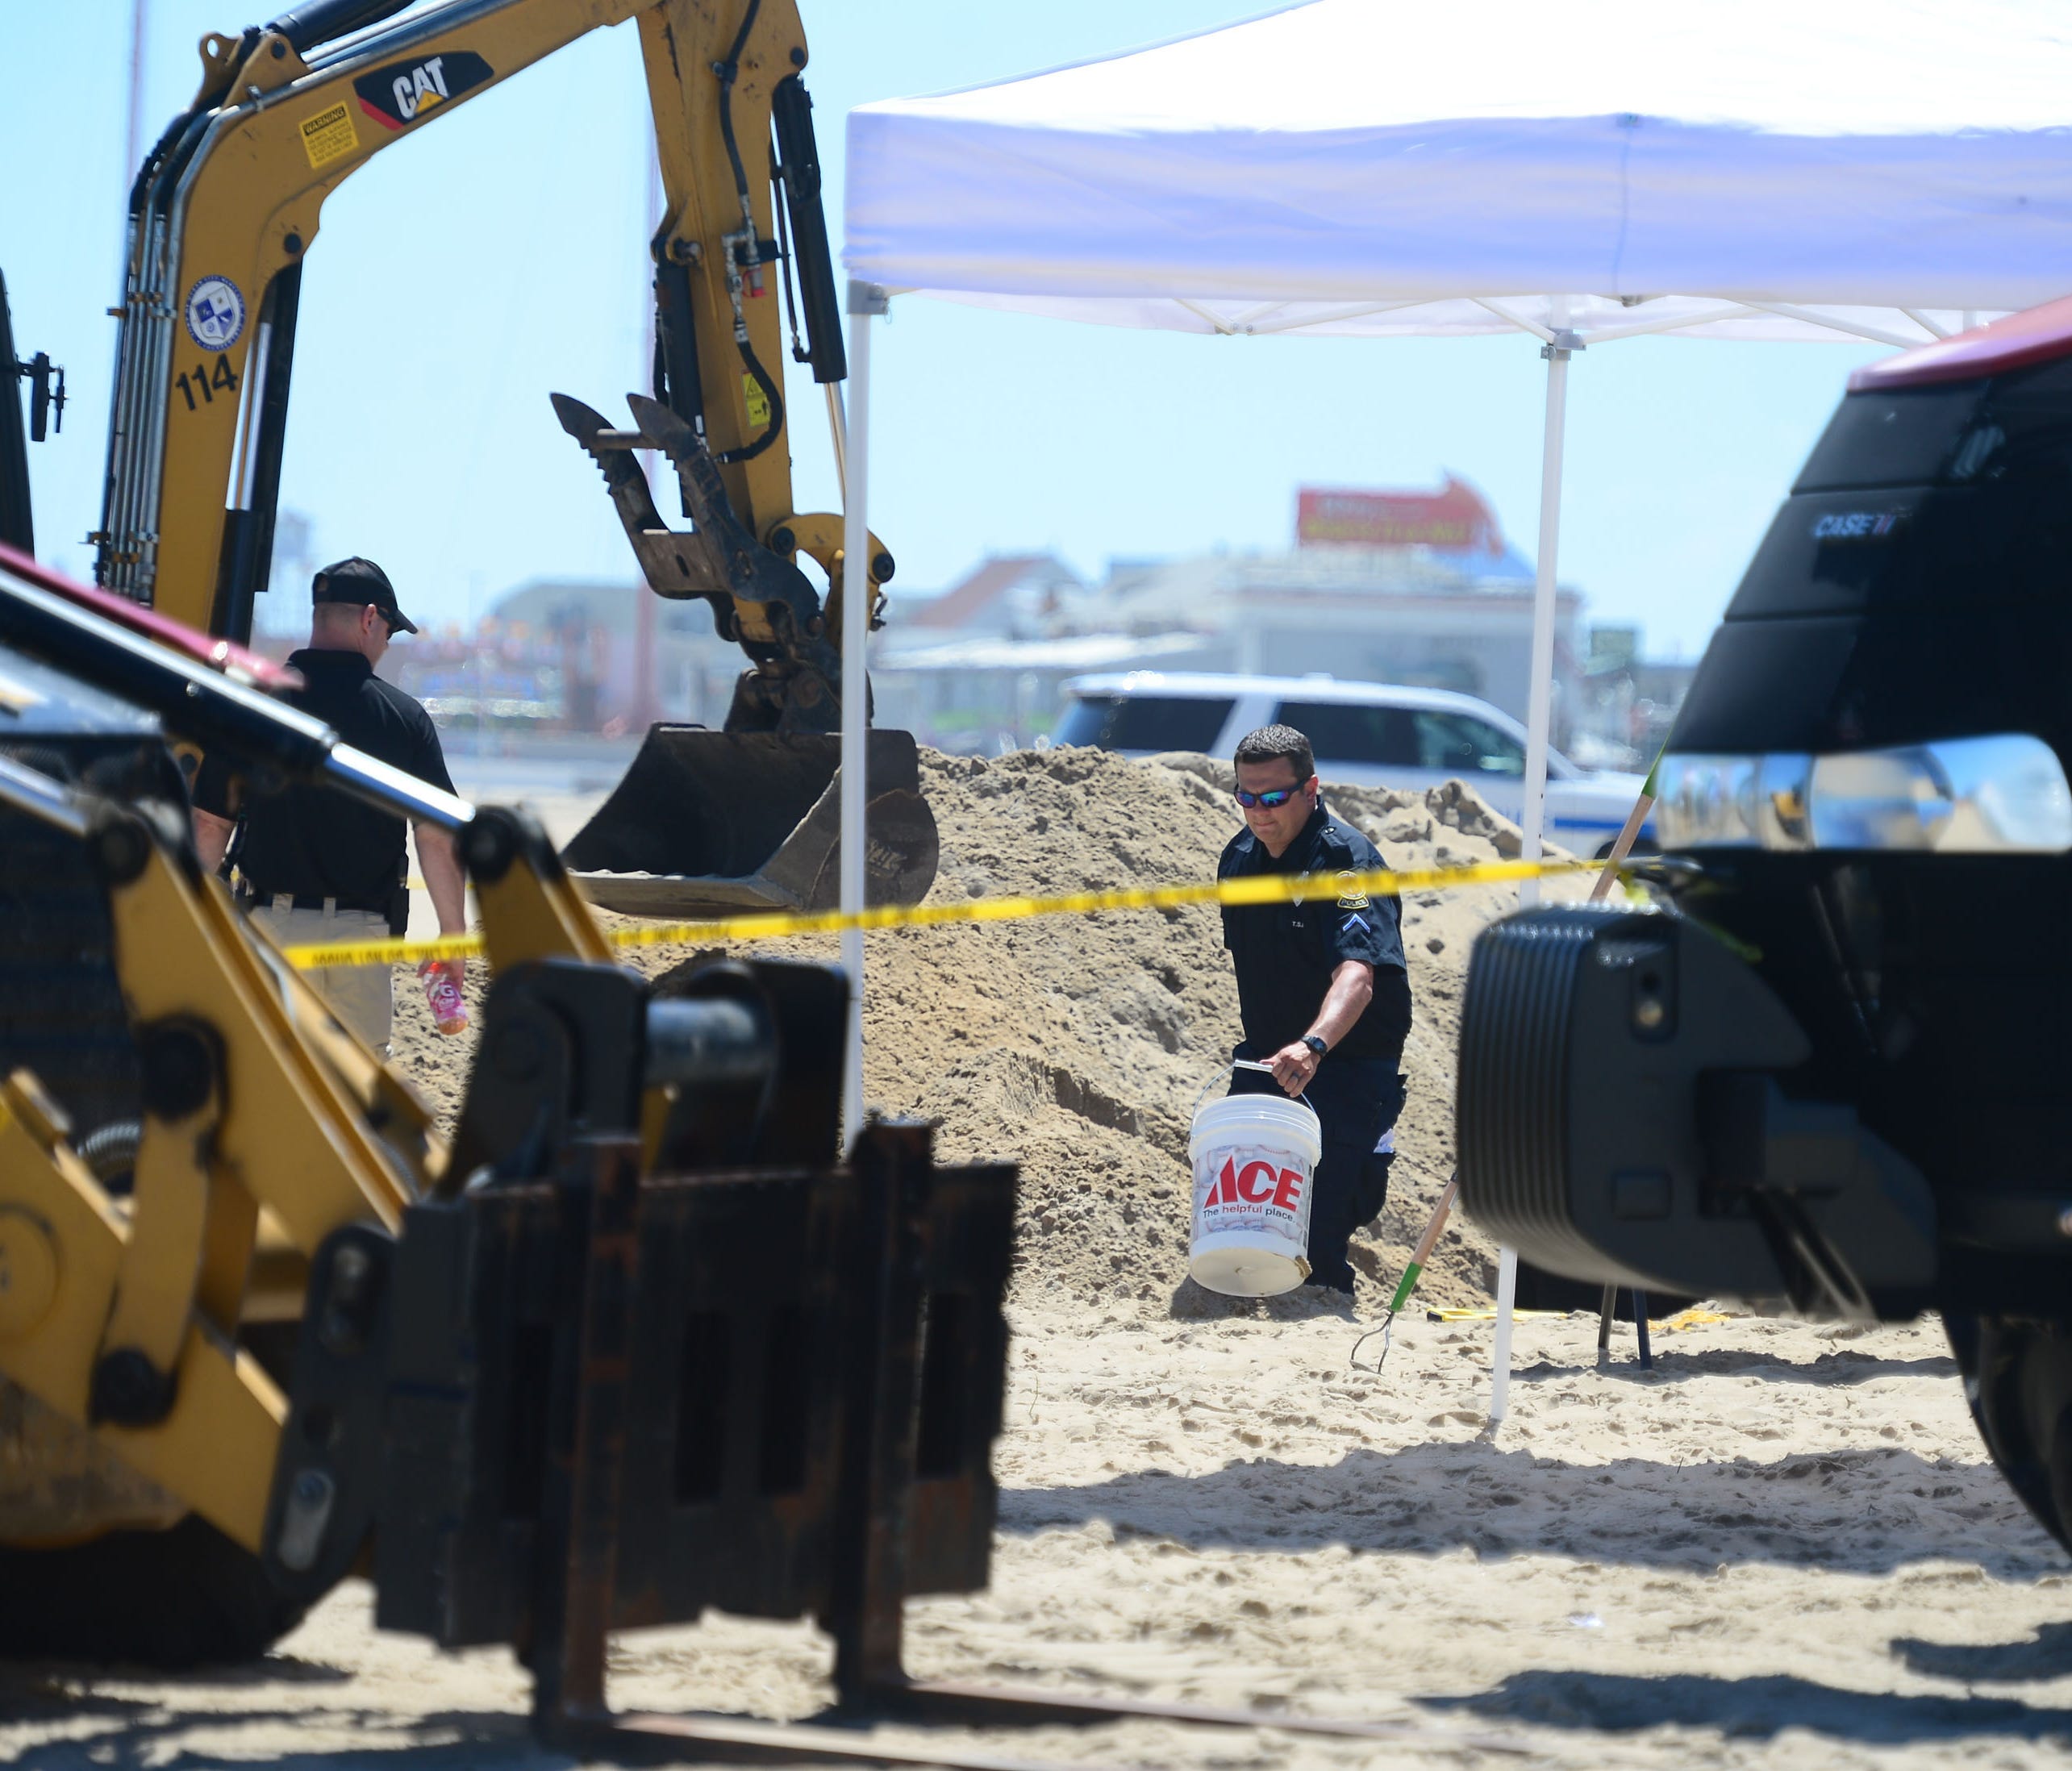 Ocean City Police carry out buckets of sand to be sifted  from a deep hole that was dug around the area where an unidentified body was found this morning around the 2nd Street beach in Ocean City, Md. on Monday, July 31, 2017.